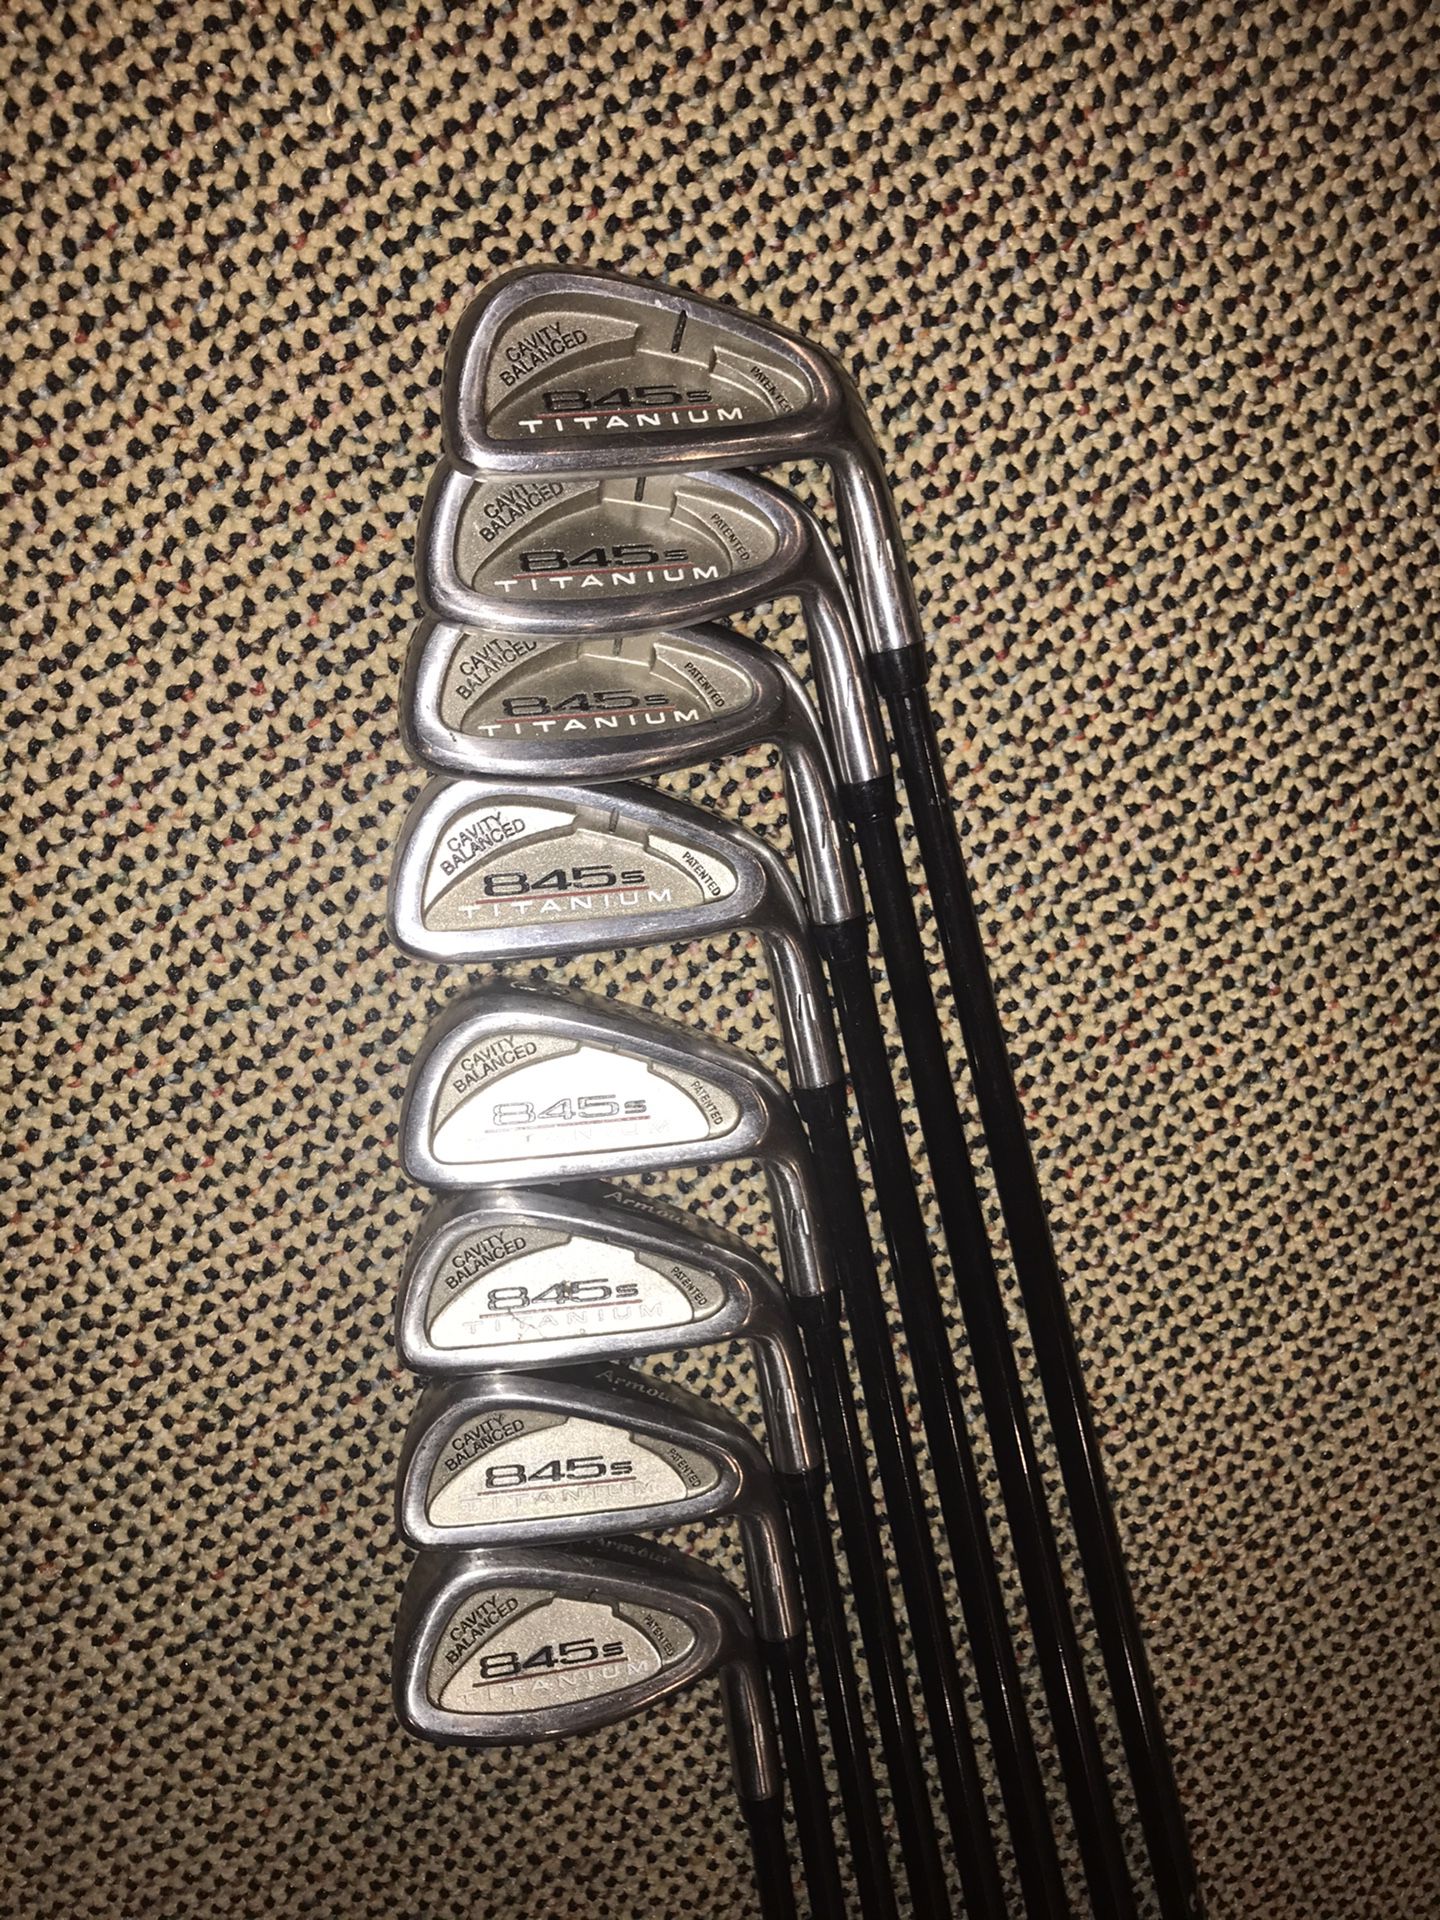 Tommy Armour Golf Clubs 845s 3-PW